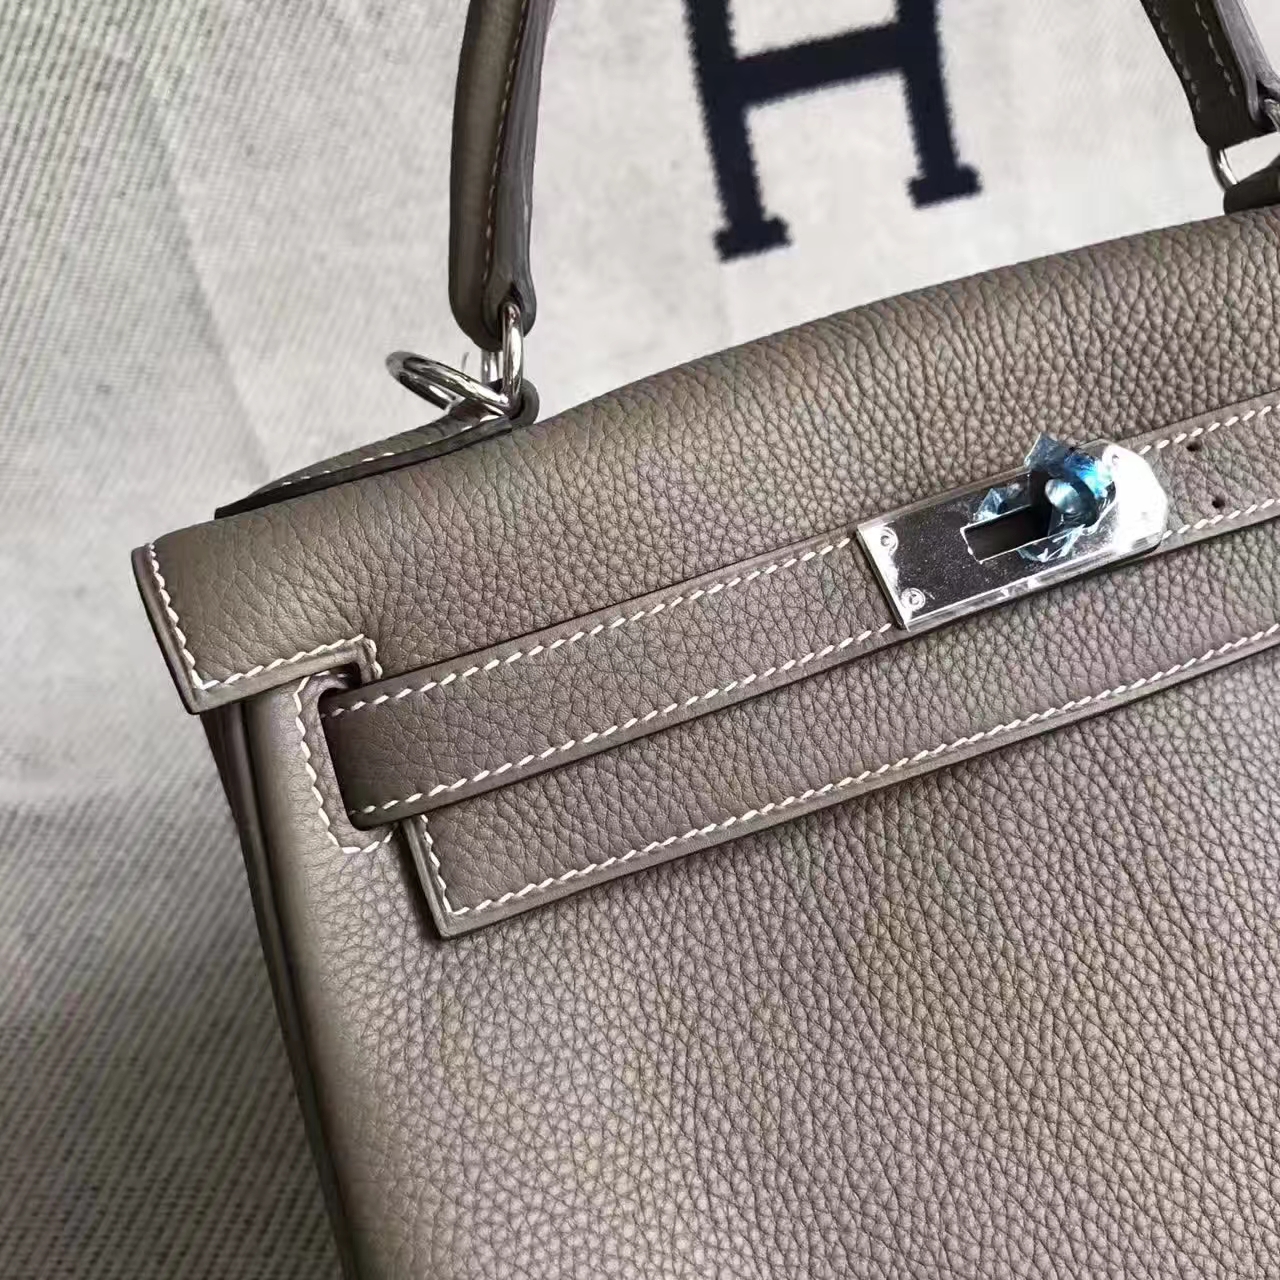 Hermès Birkin kelly - Hermès bags are all hand-stitched. “The stitching is  not going to necessarily be even and uniform all the way across.